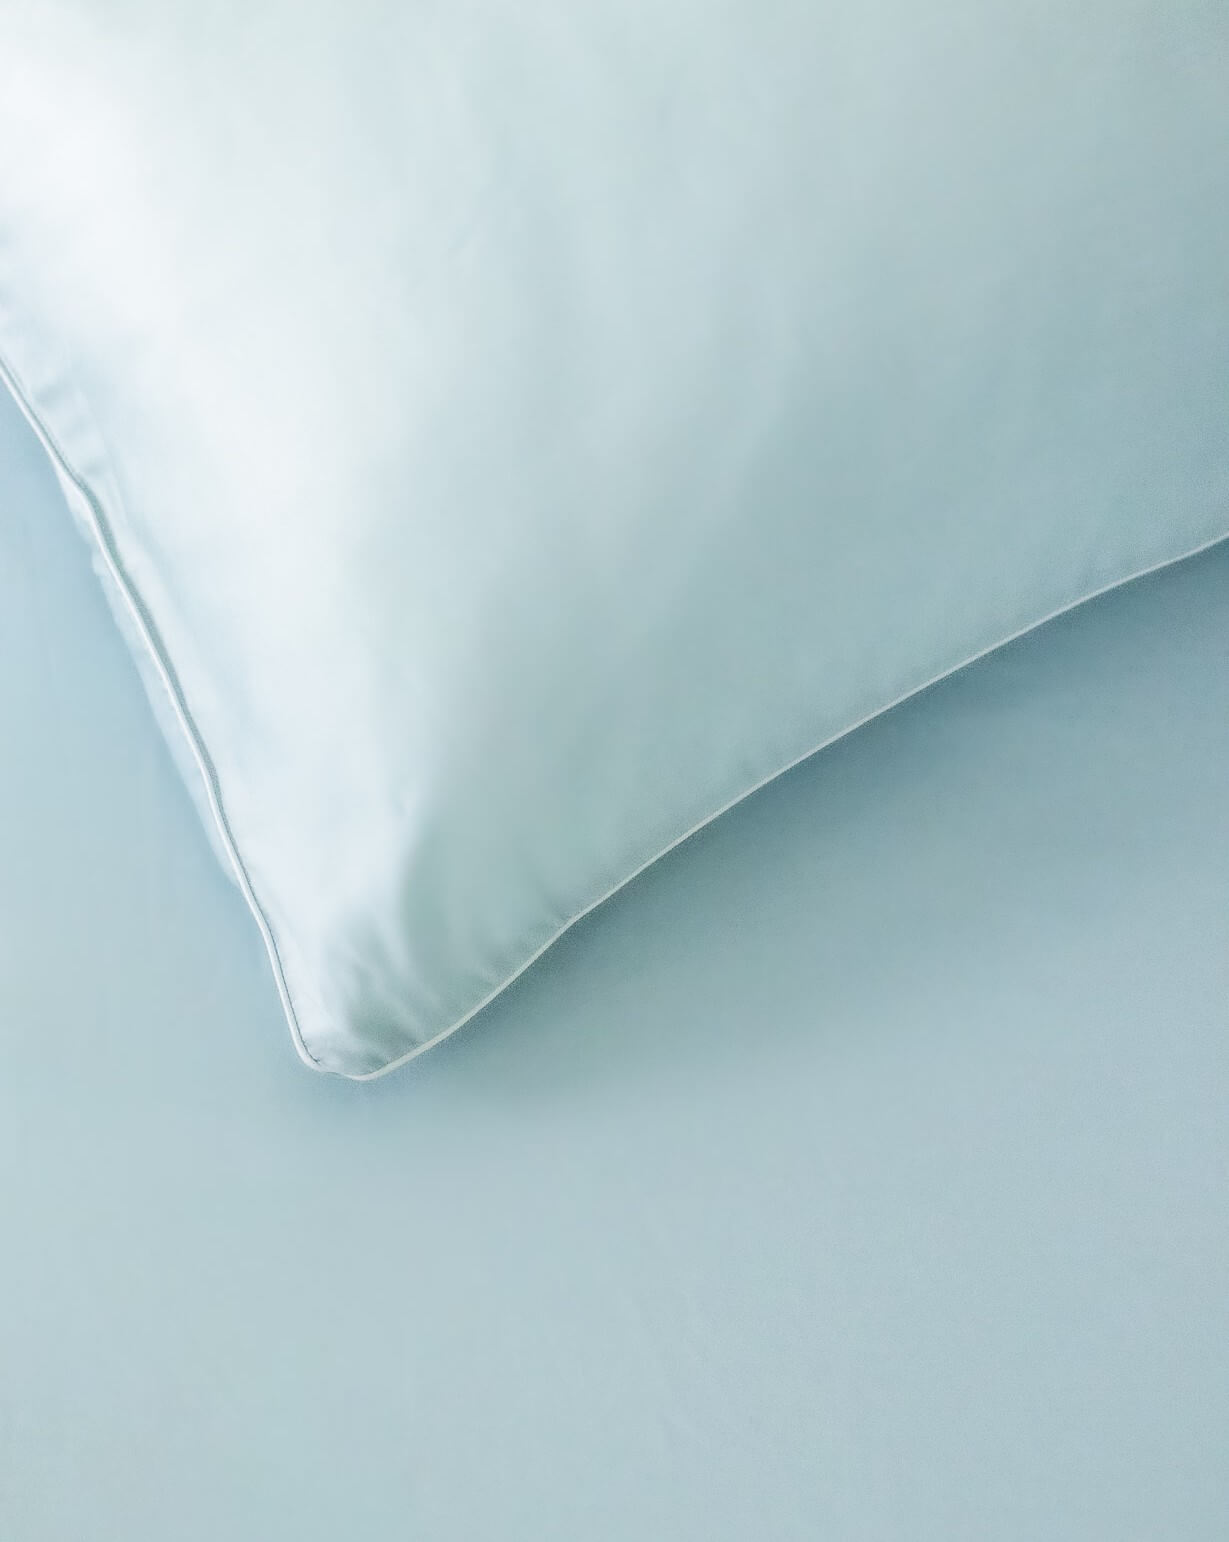 ava and ava philippines organic bamboo lyocell sheet set (2 pillowcases 1 fitted sheet) in powder blue (sky blue with white piping). ava and ava ph soft, cooling, breathable bed sheets.